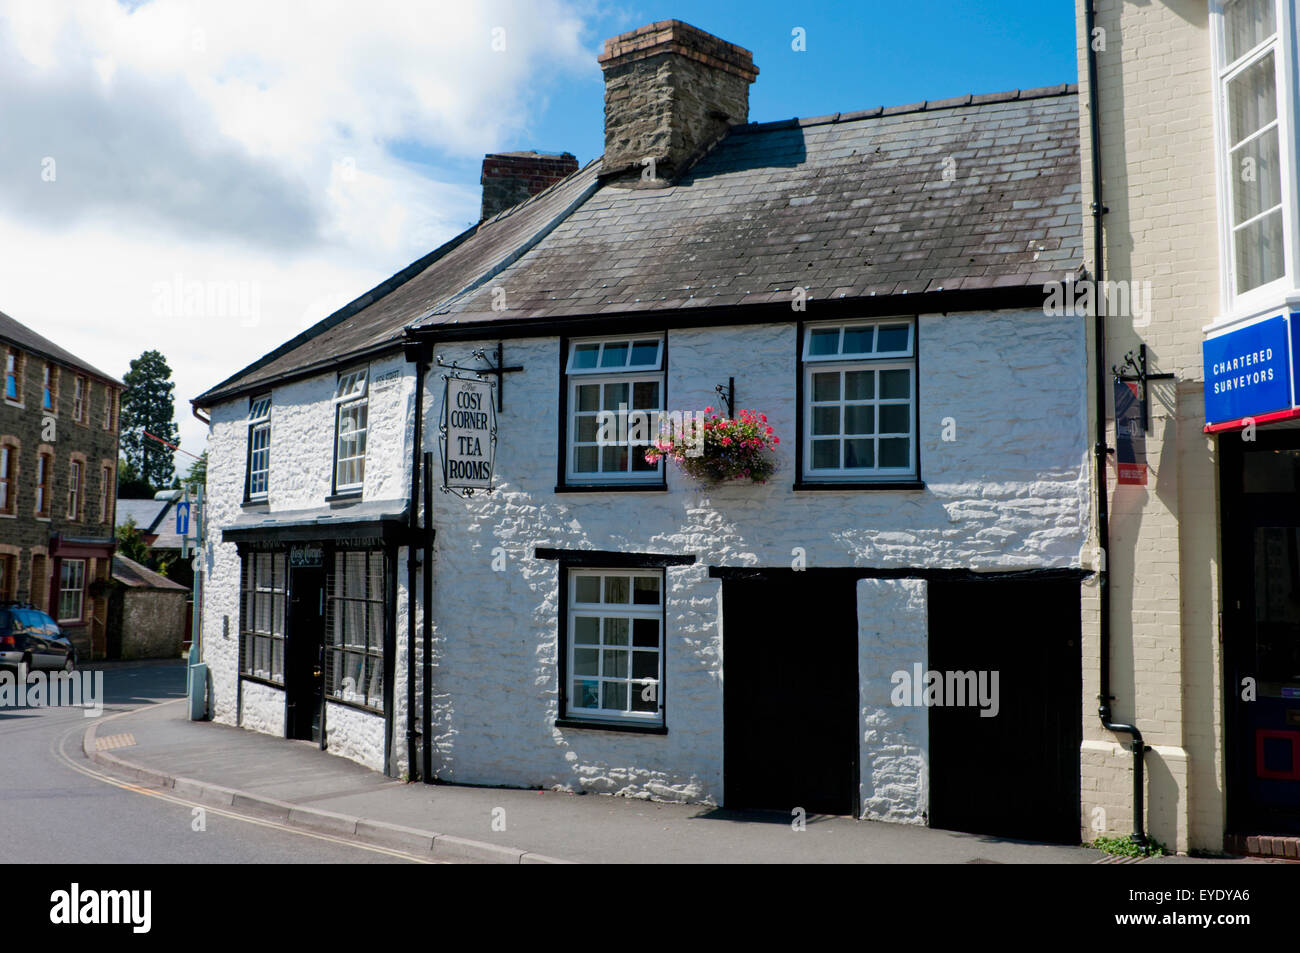 Builth Wells Cafe, Powys, Wales Uk Stock Photo